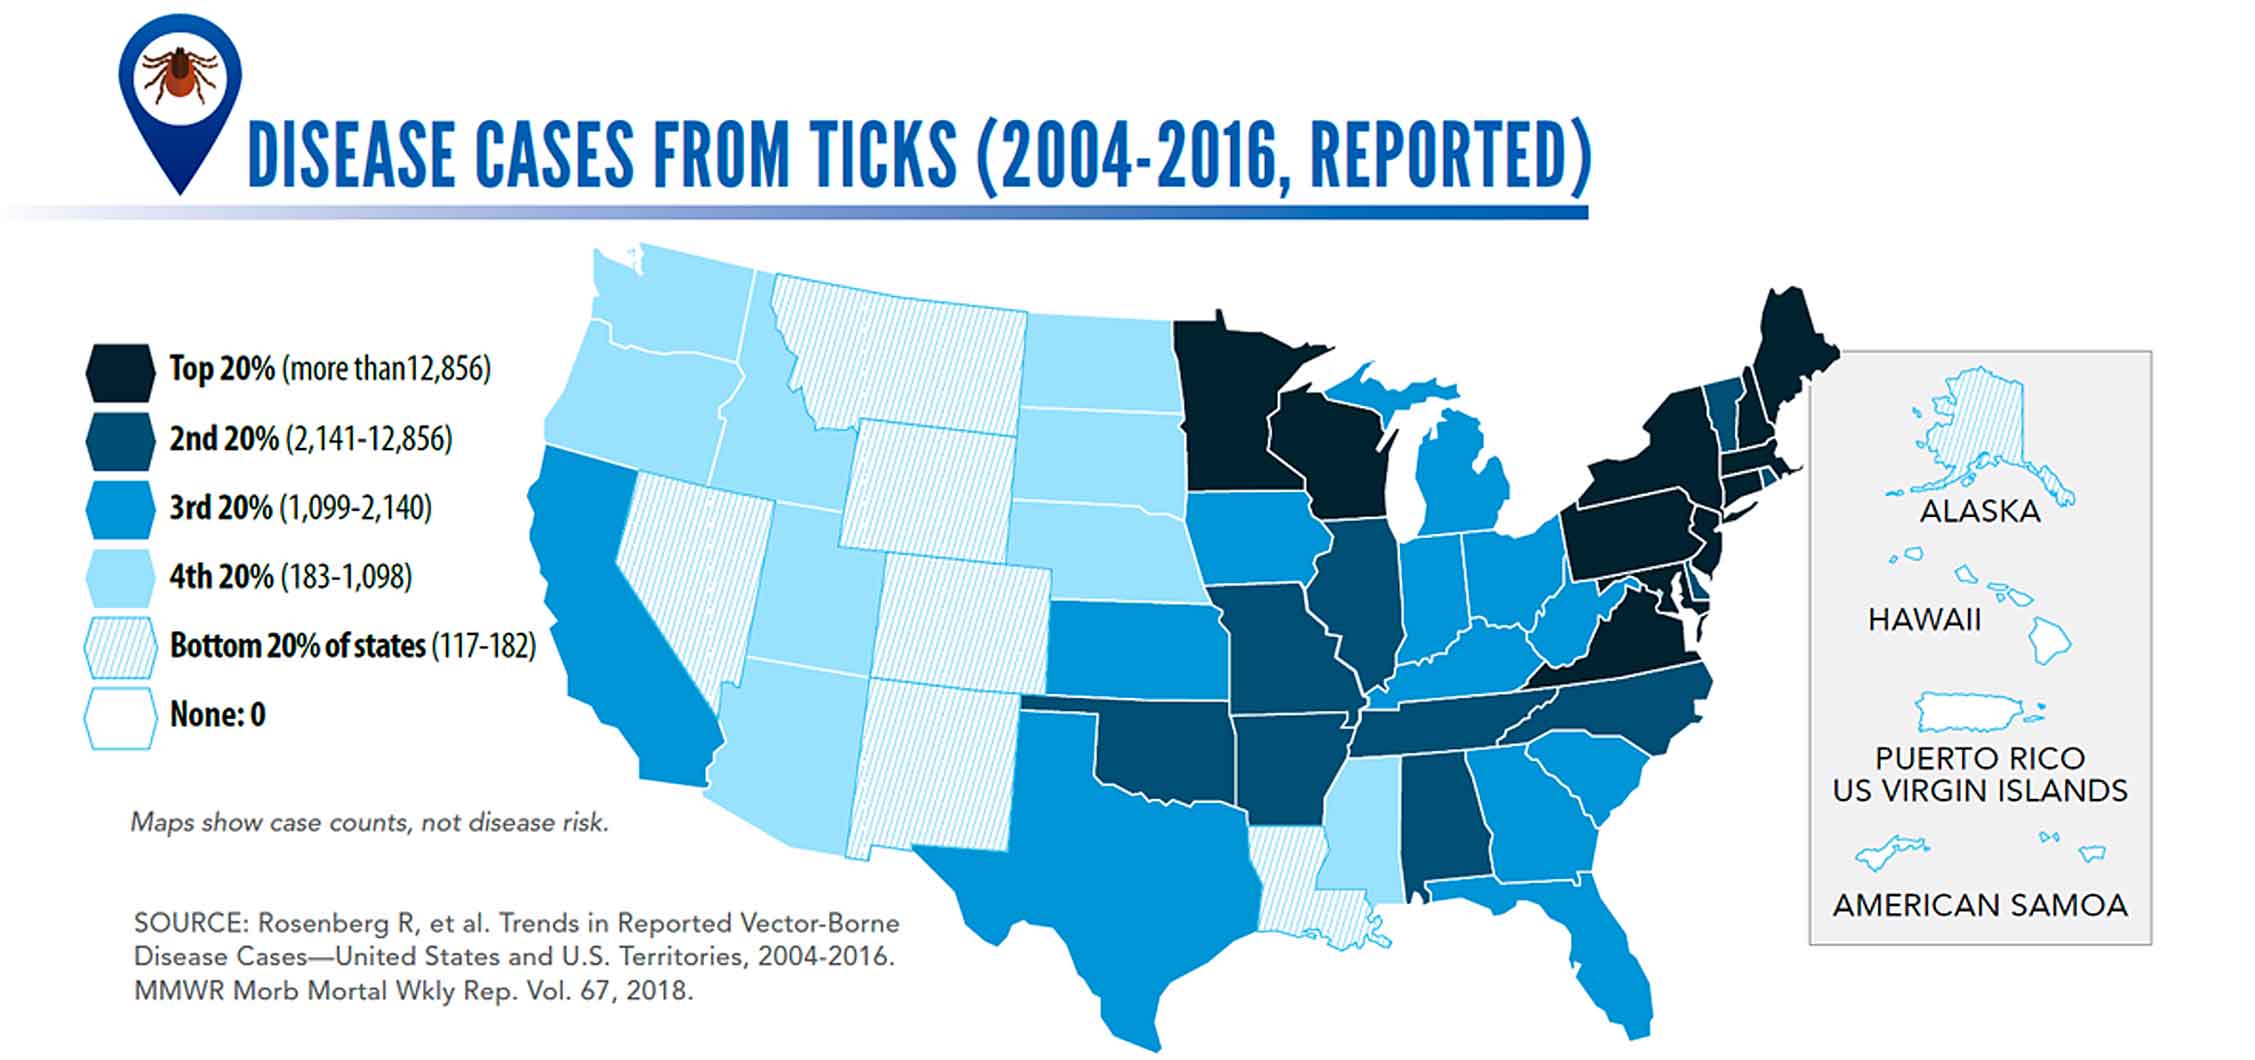 Disease cases from ticks (2004-2016, reported) (Courtesy of Vital Signs)